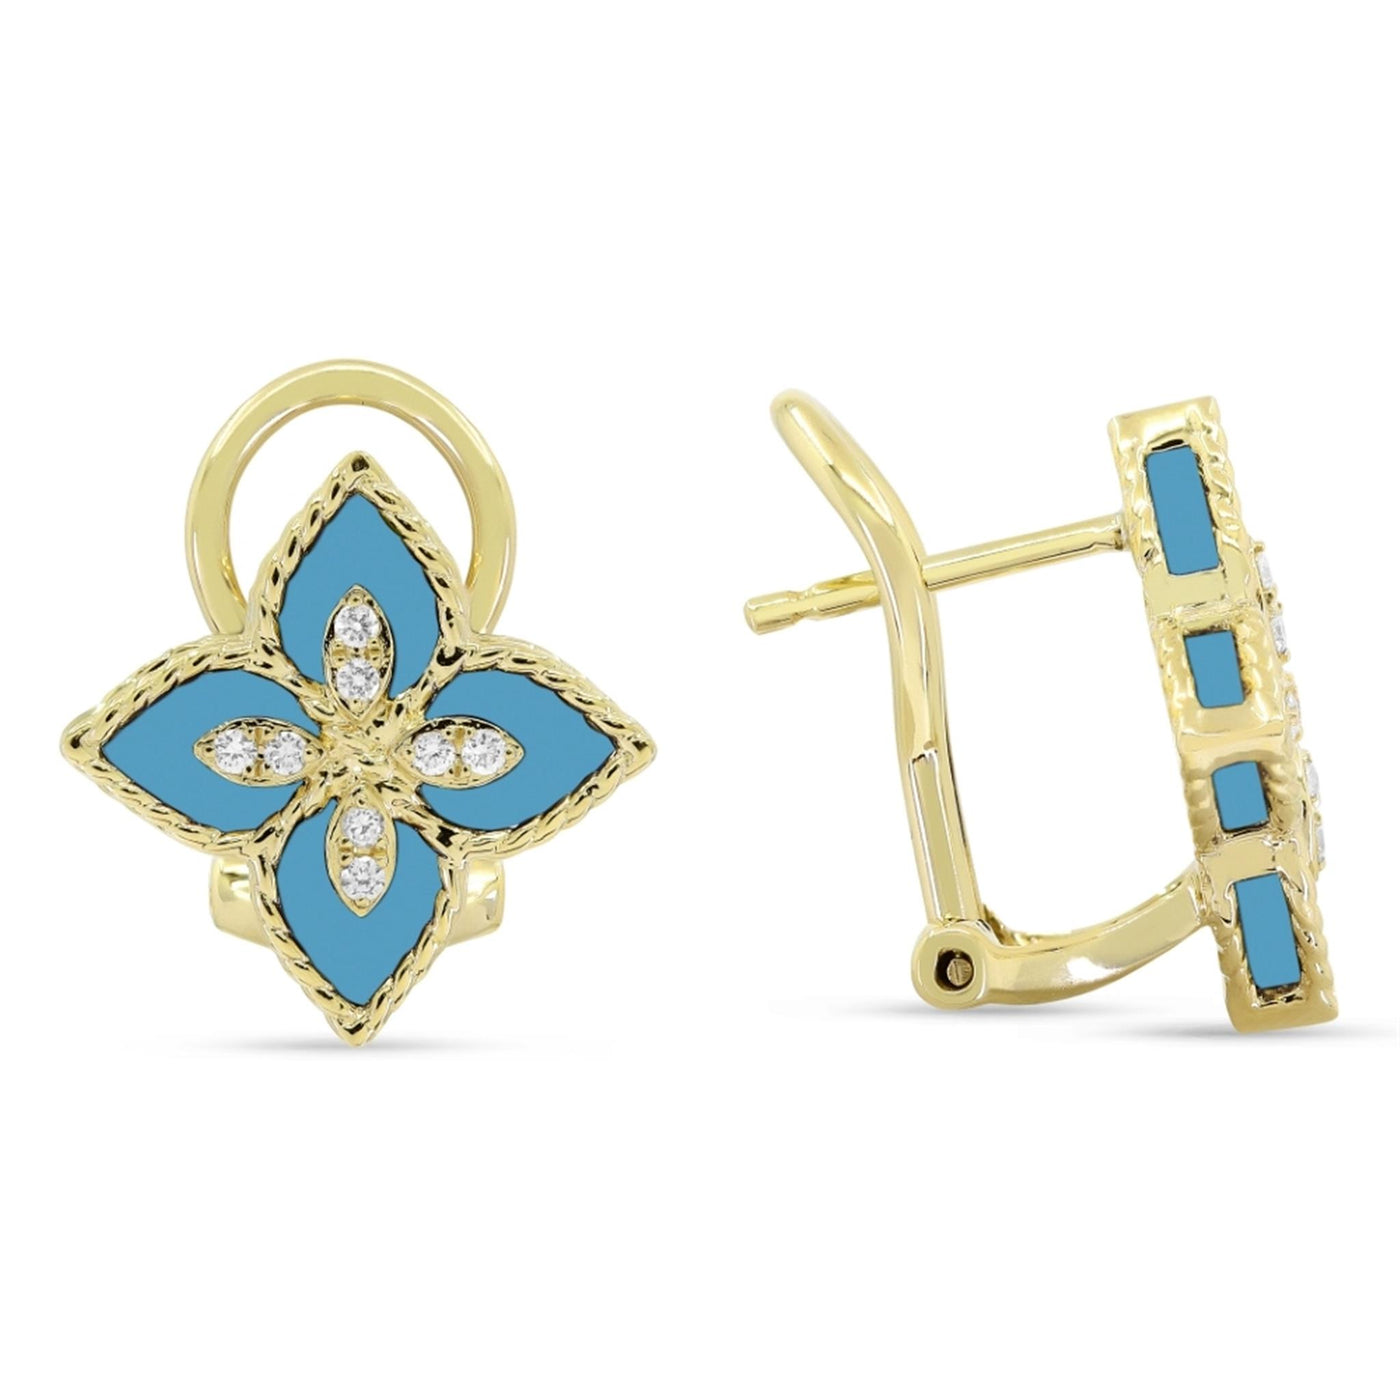 14K Yellow Gold 2.46ctw Etruscan Floral Style Fantasy Cut Turquoise and Diamond Earrings